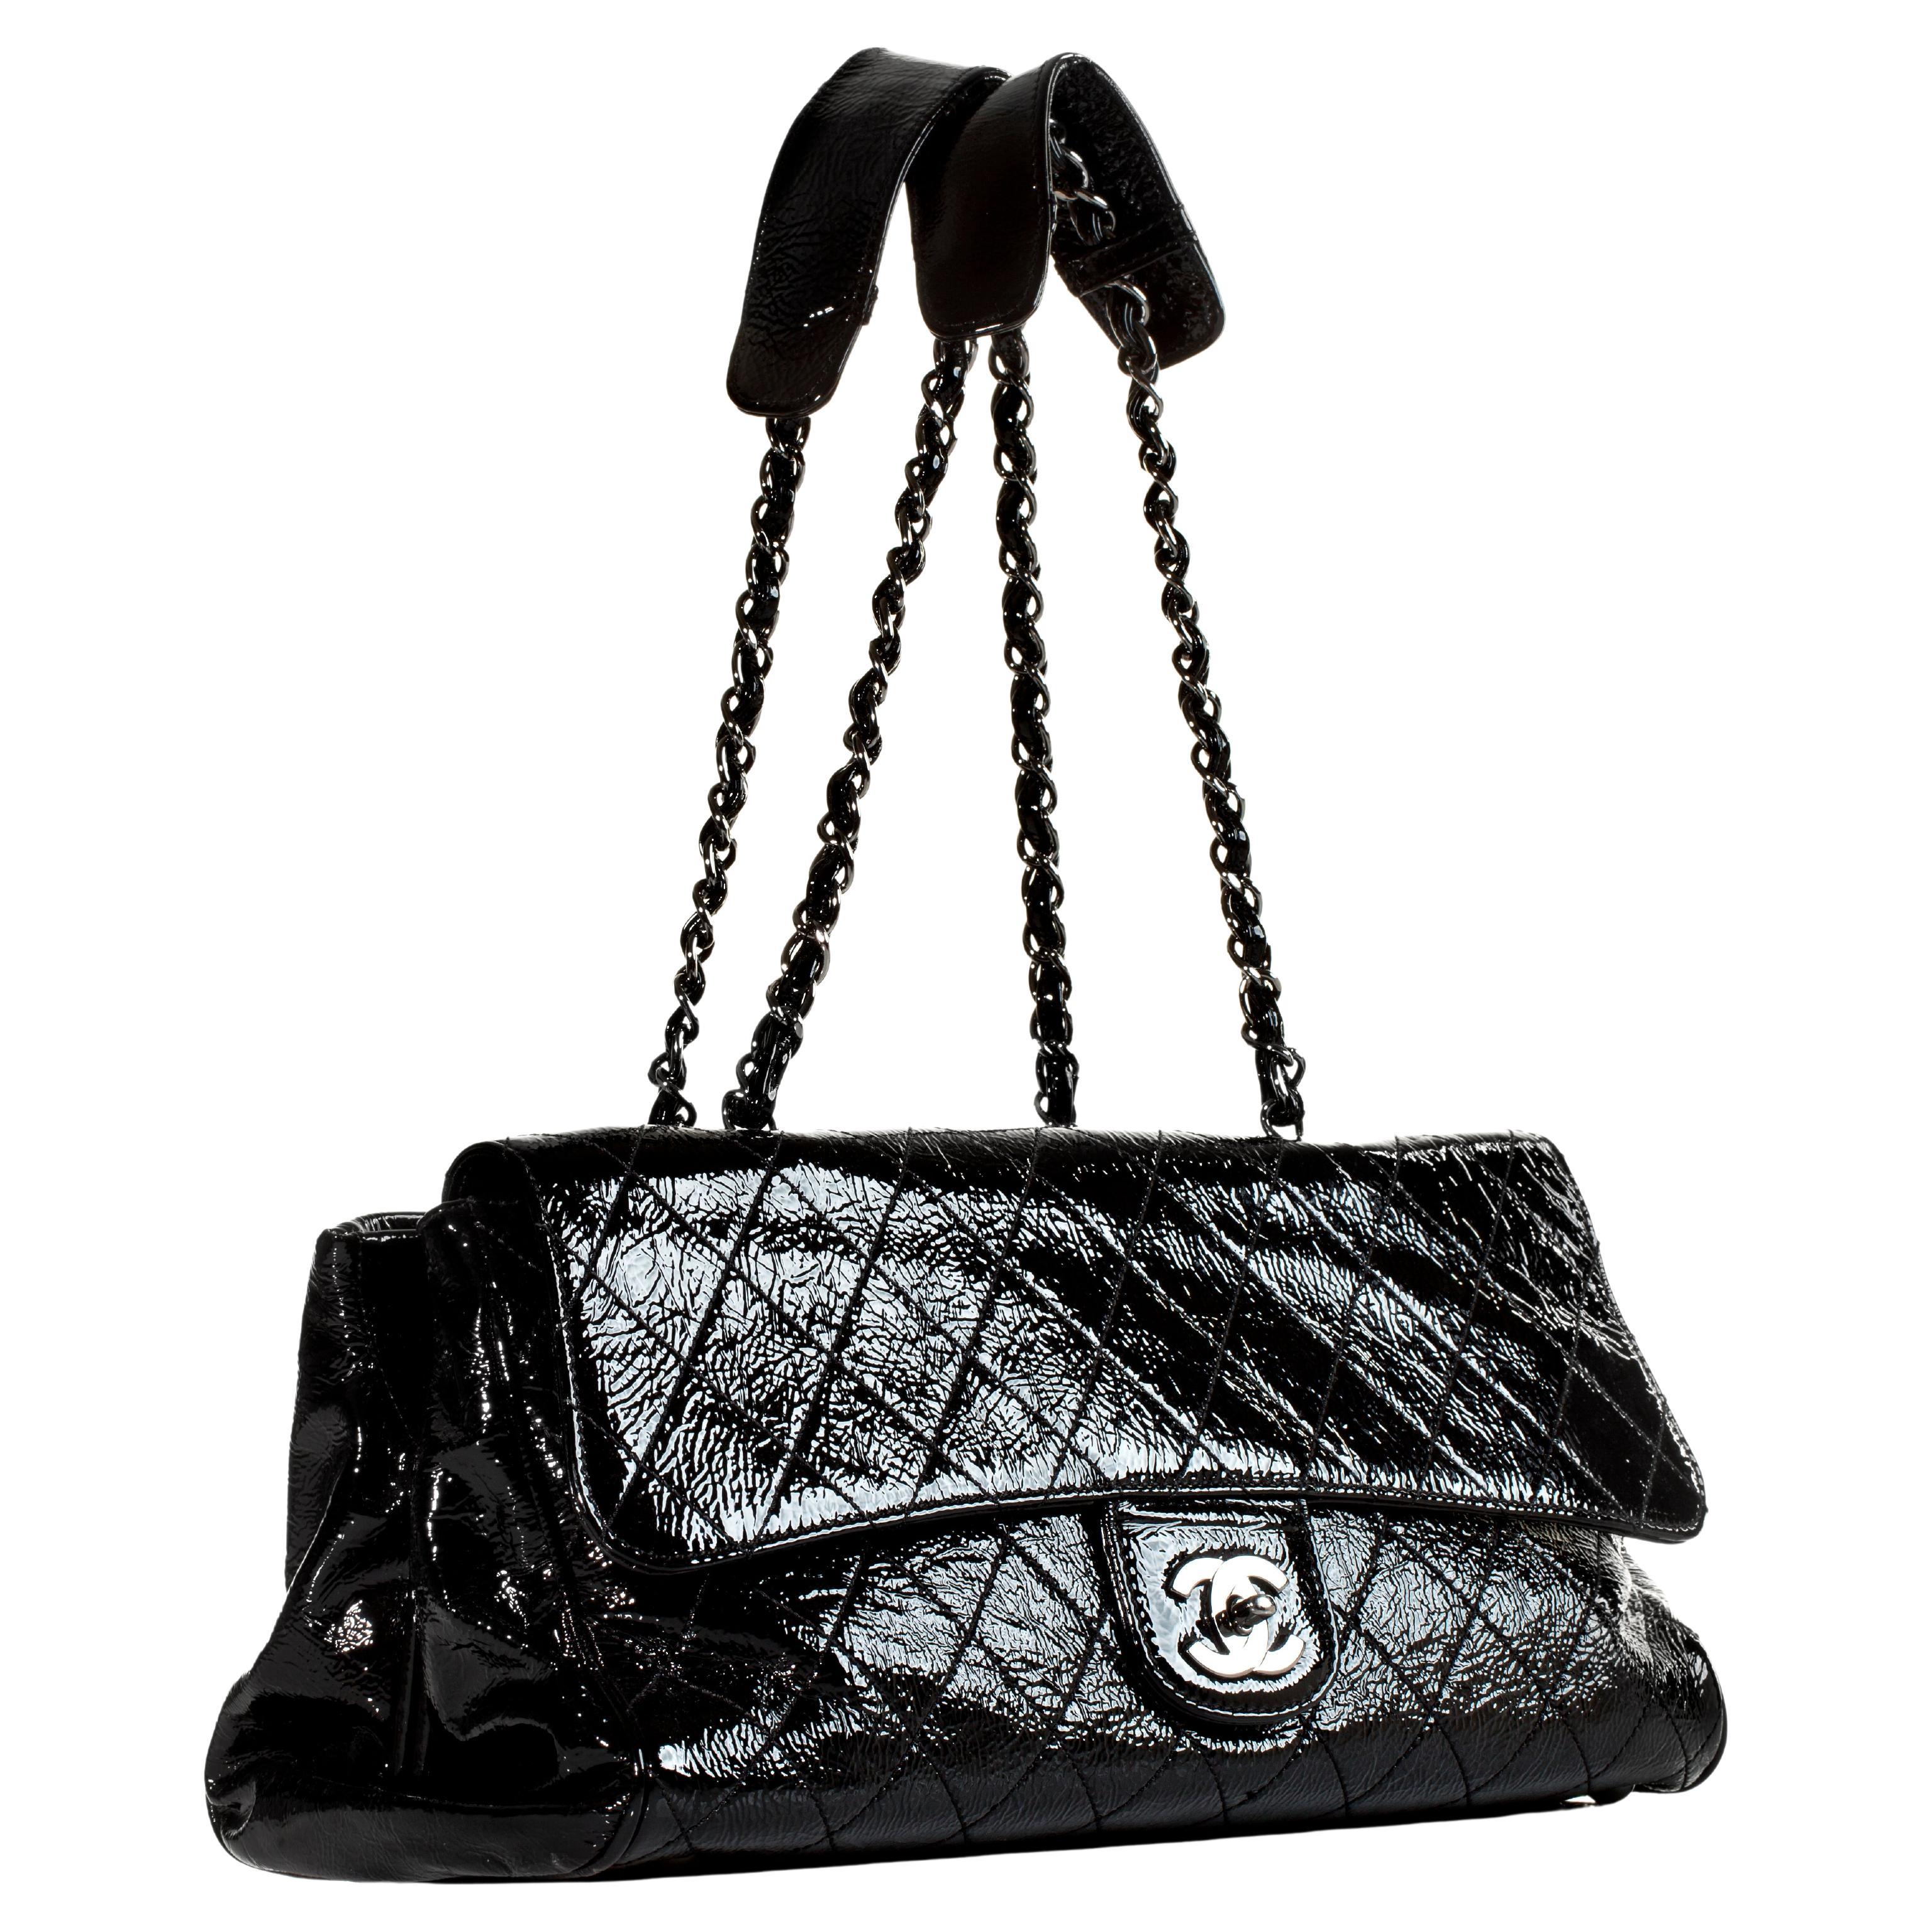 Chanel 2006 Small Patent Flap Bag Kiss lock Multi Compartment Shoulder Tote Bag For Sale